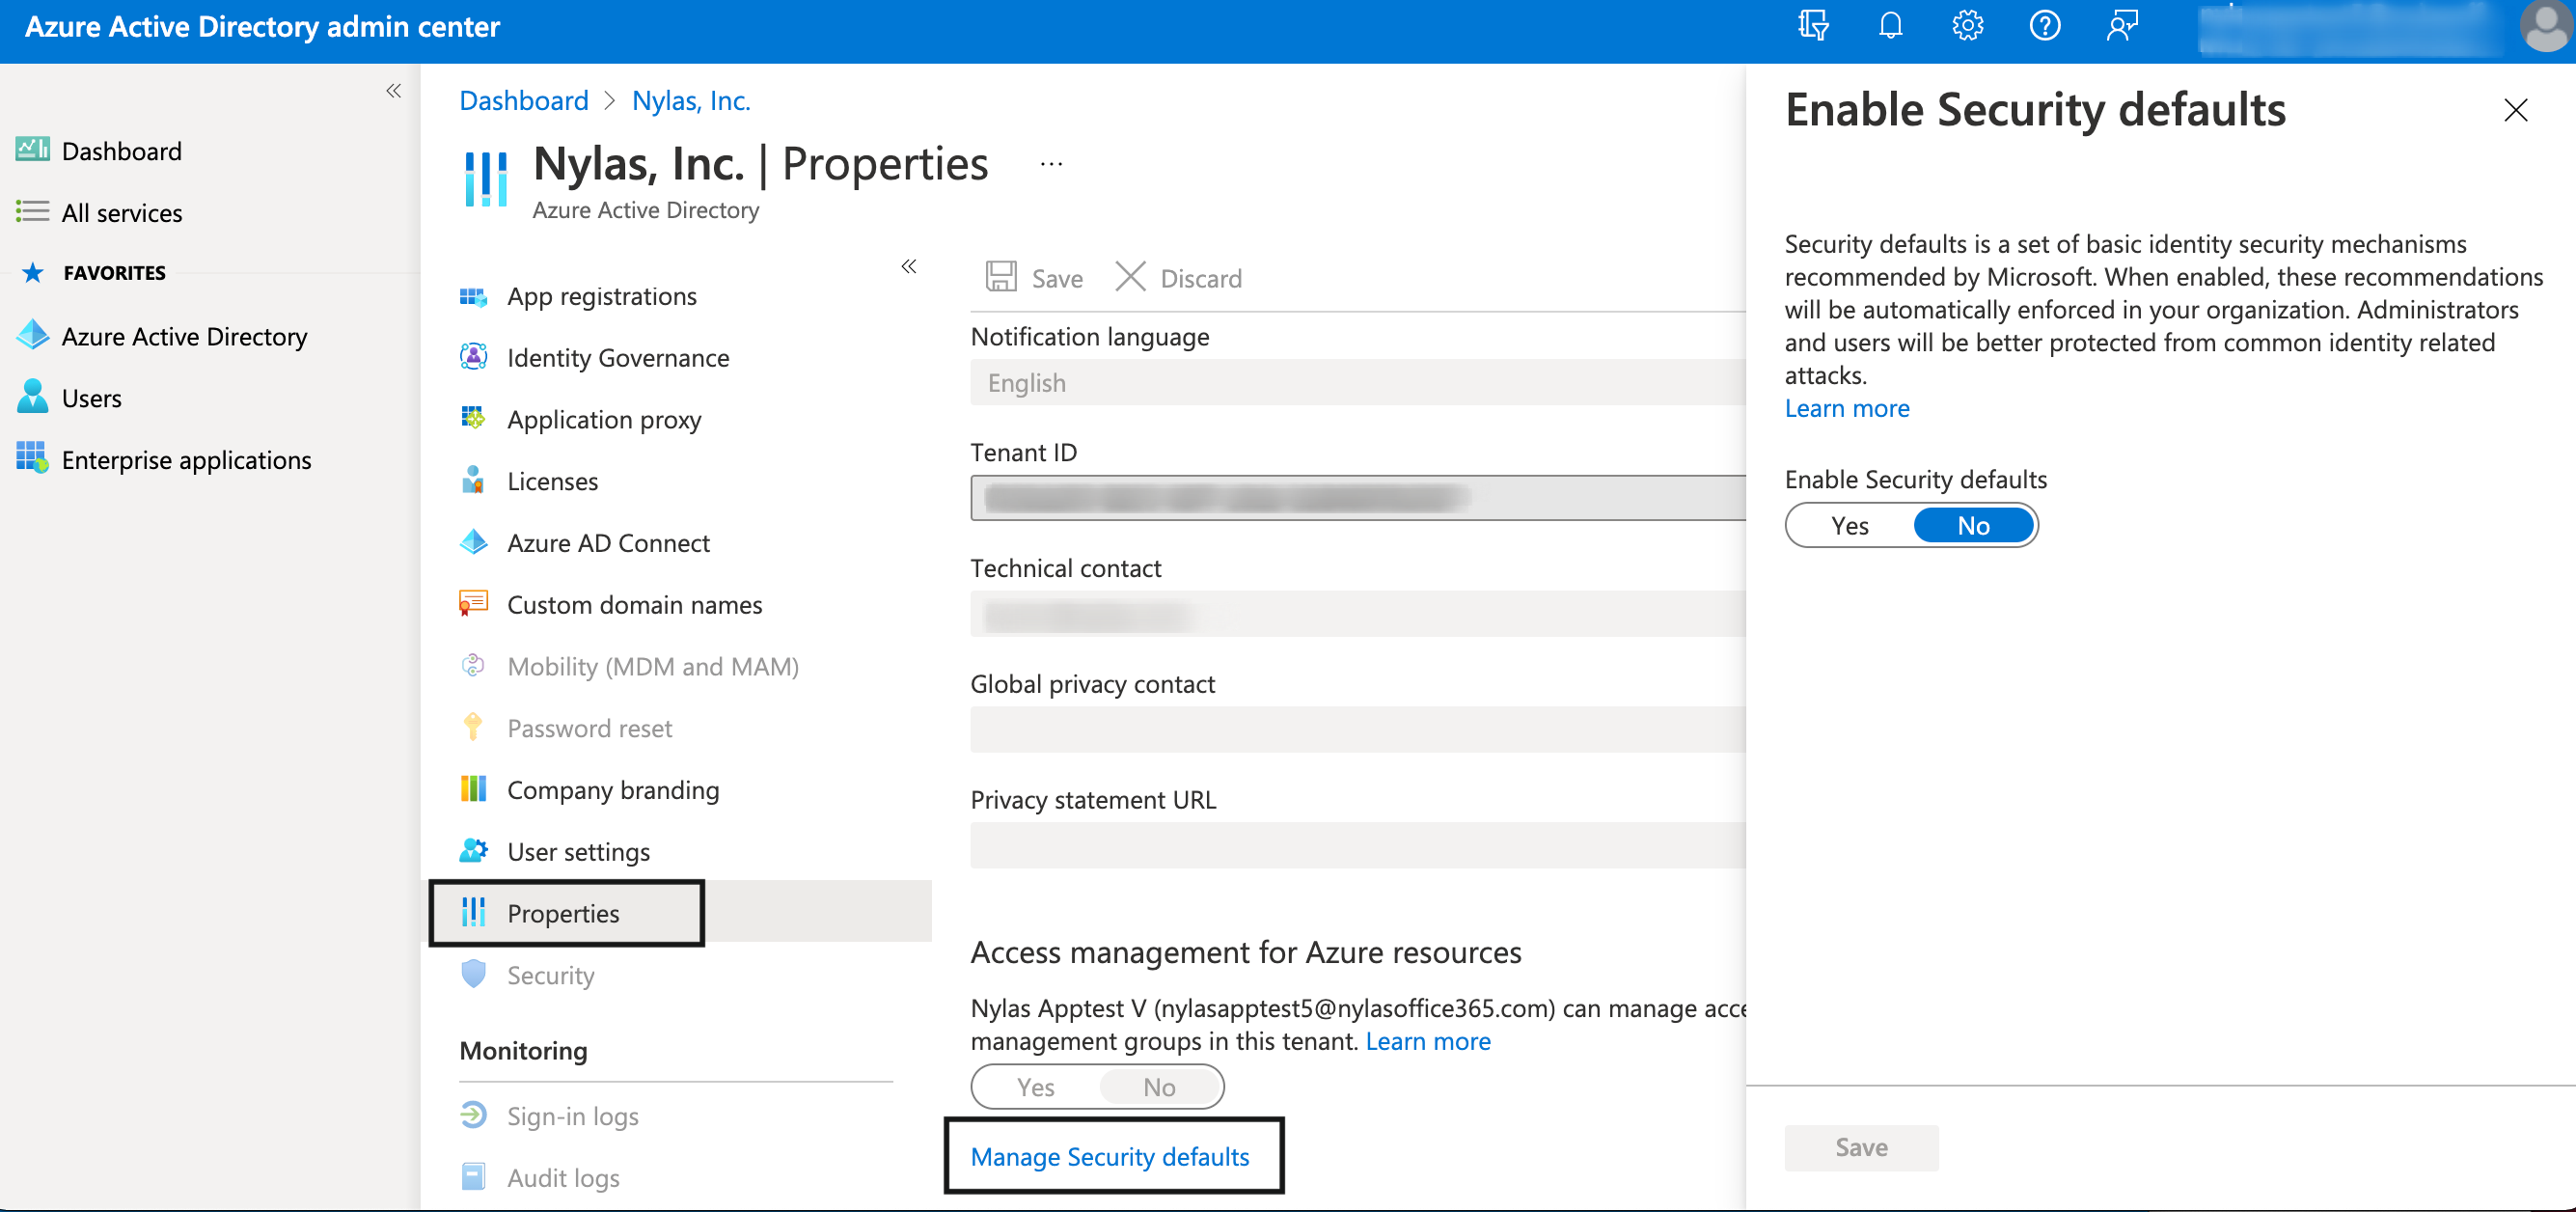 Azure active directory admin center showing security defaults tab open.